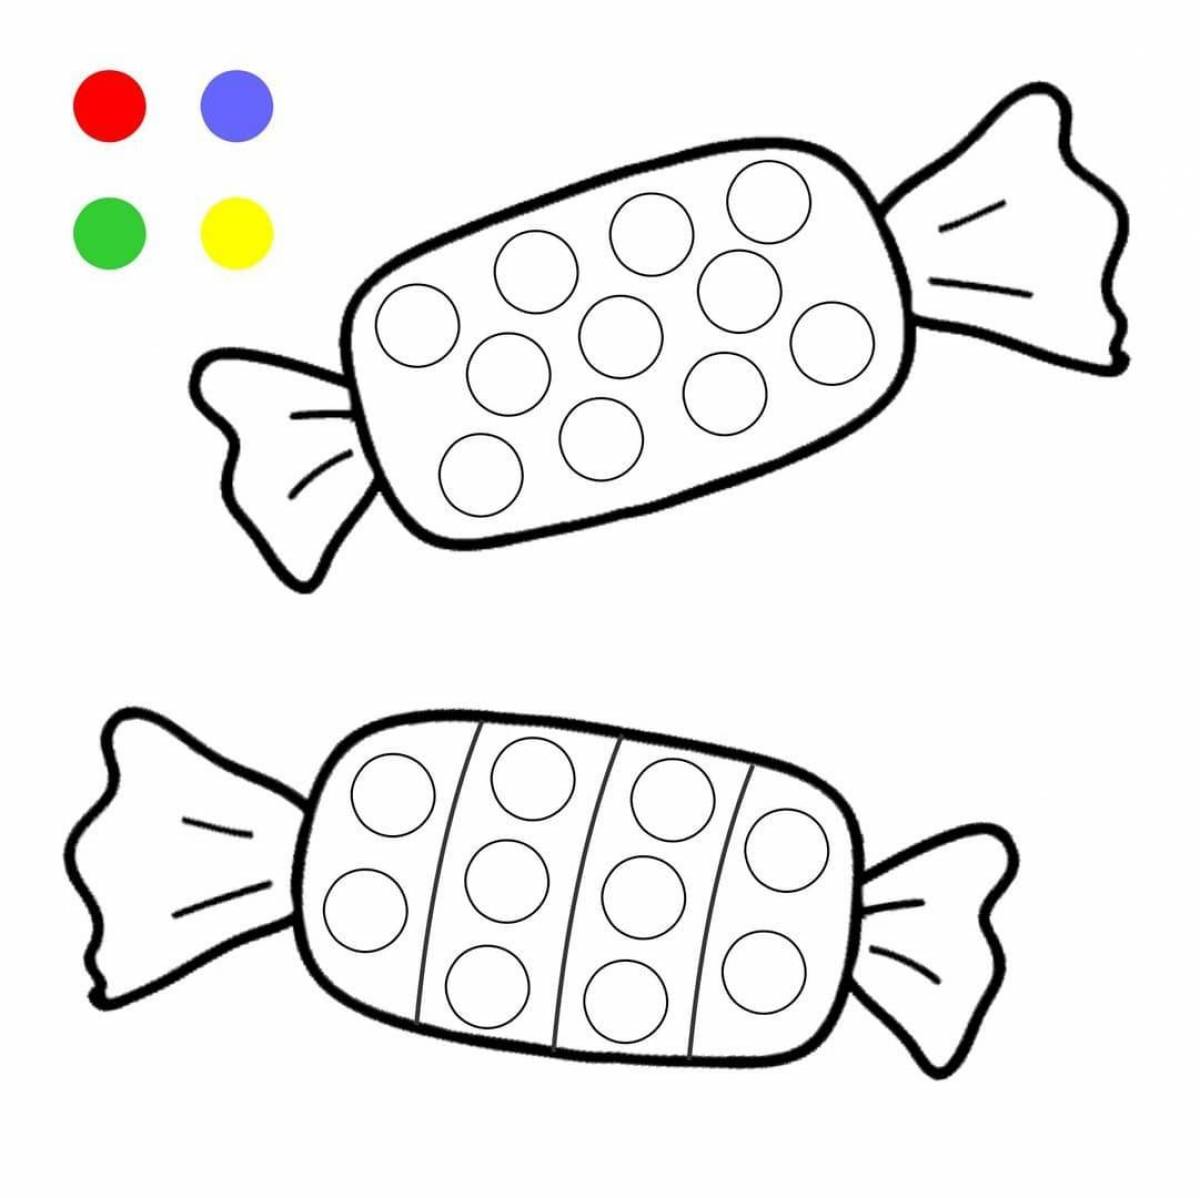 Color bright finger coloring page